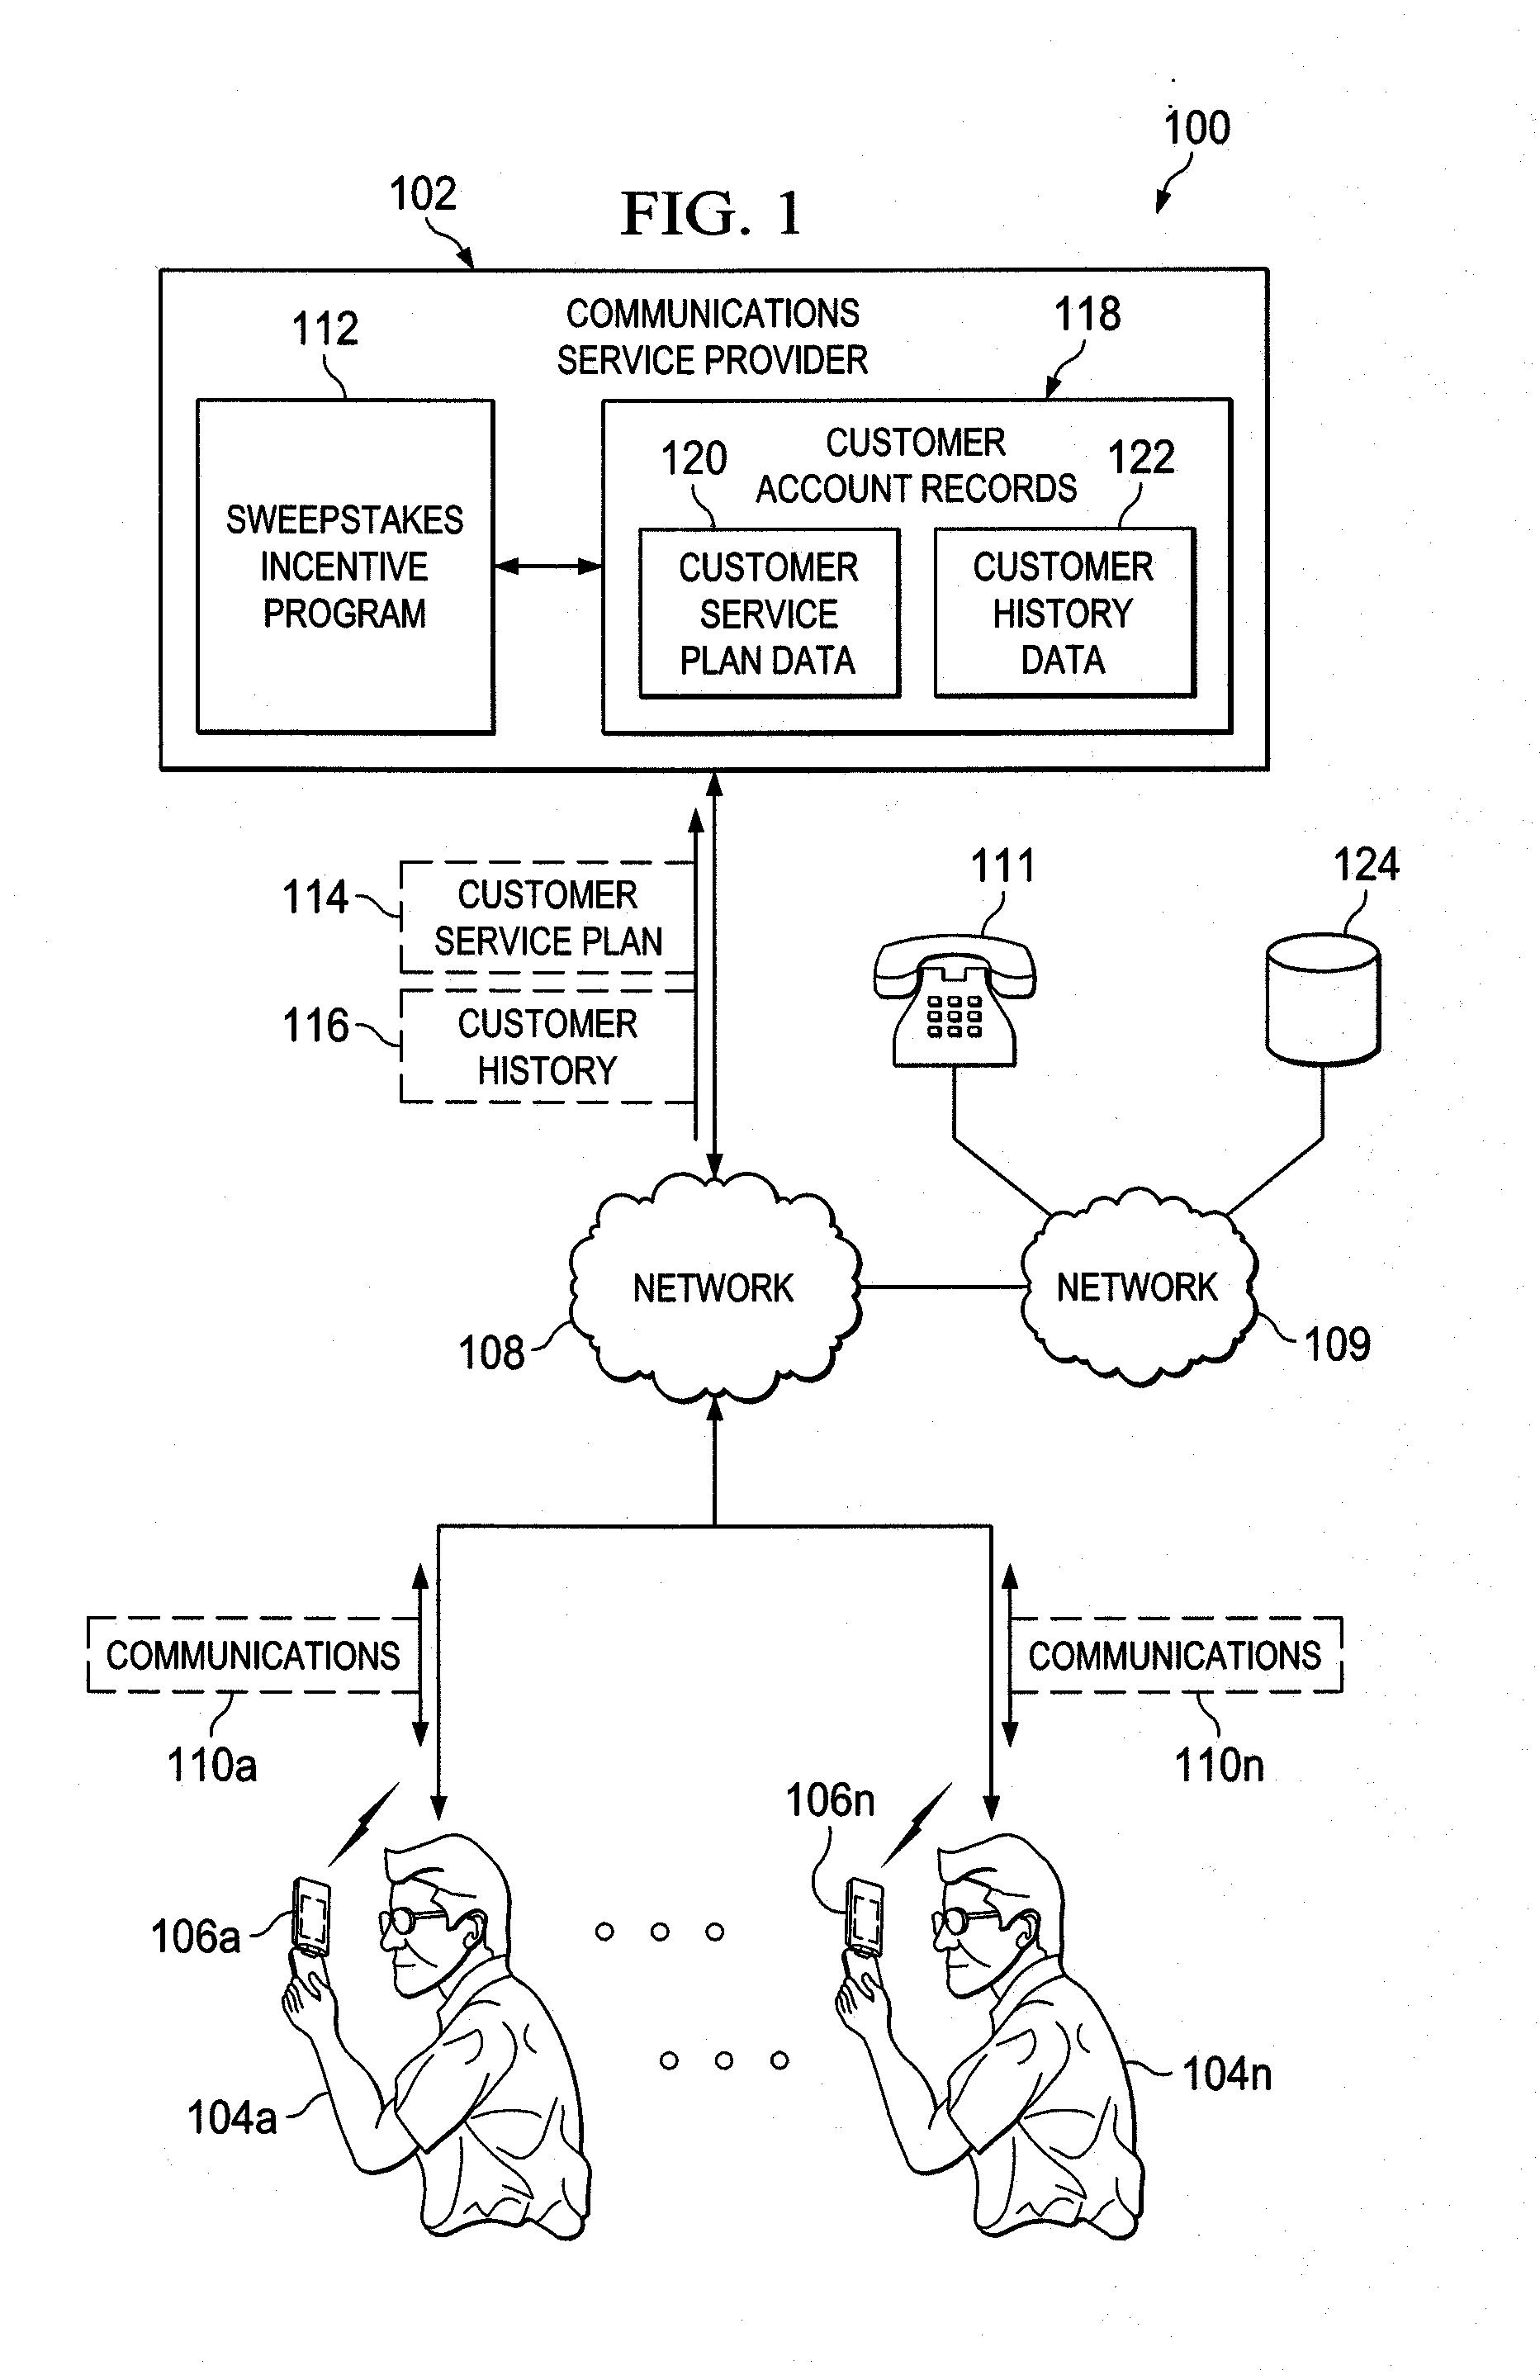 System and method for reducing churn for a communications service